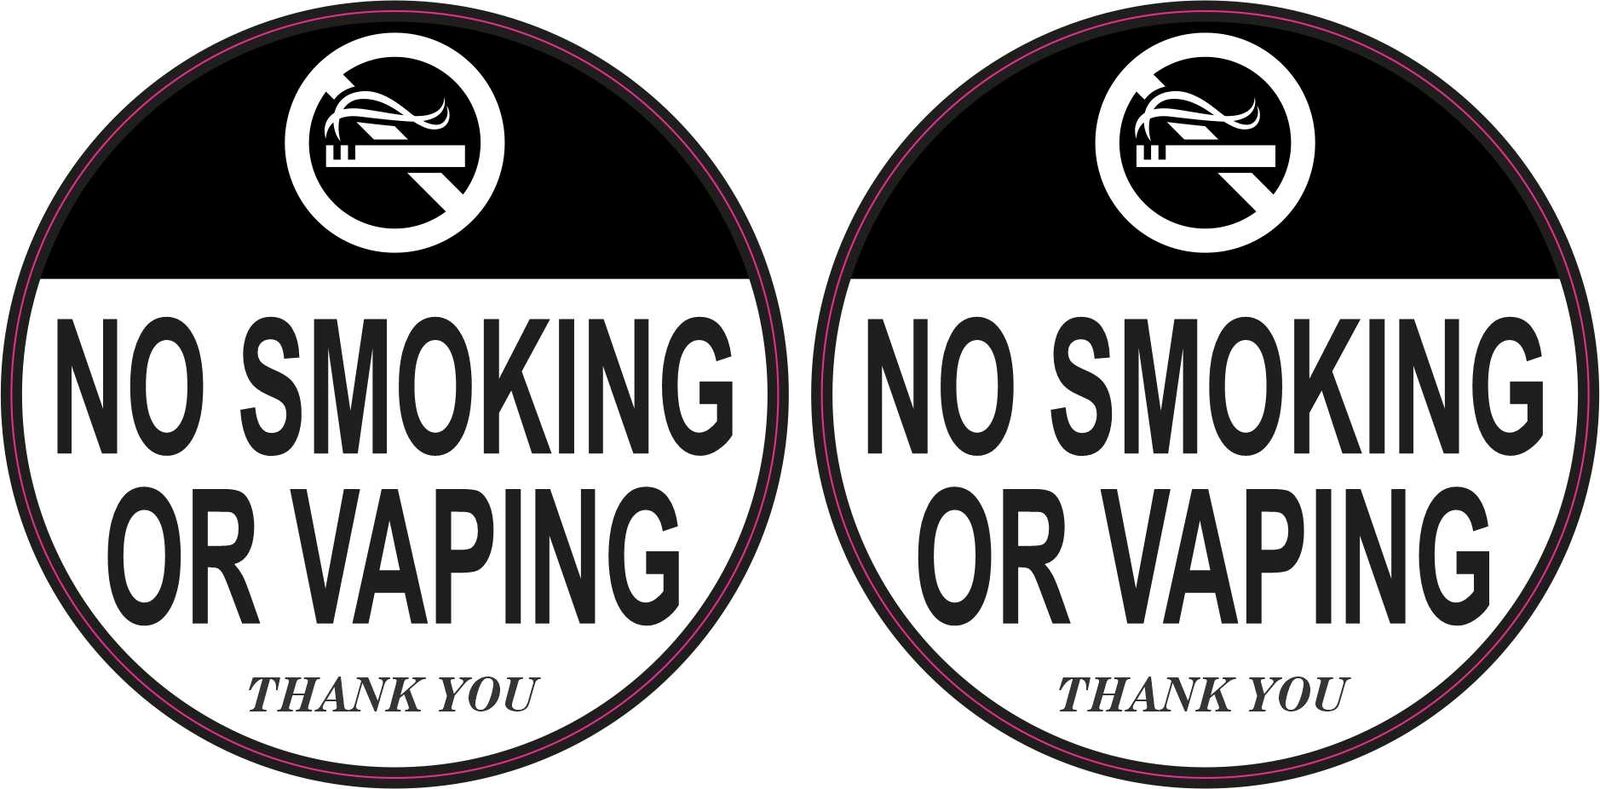 3in x 3in No Smoking or Vaping Vinyl Stickers Car Vehicle Symbol Business Decal